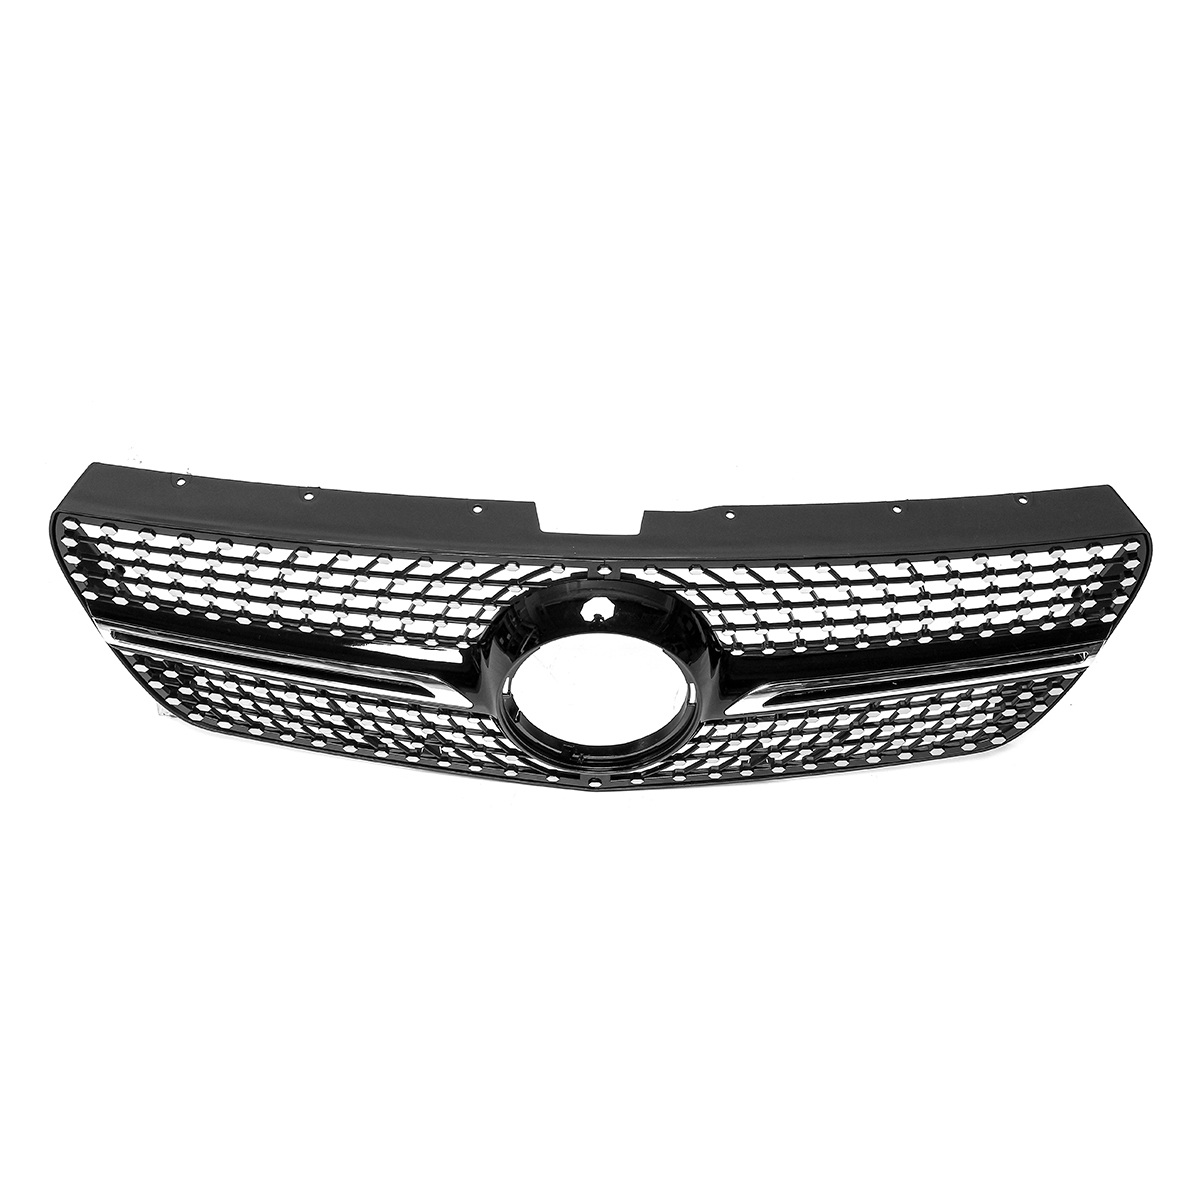 Diamond Style Car Front Hood Bumper Grille Grill for Mercedes Benz Vito 2015-2018